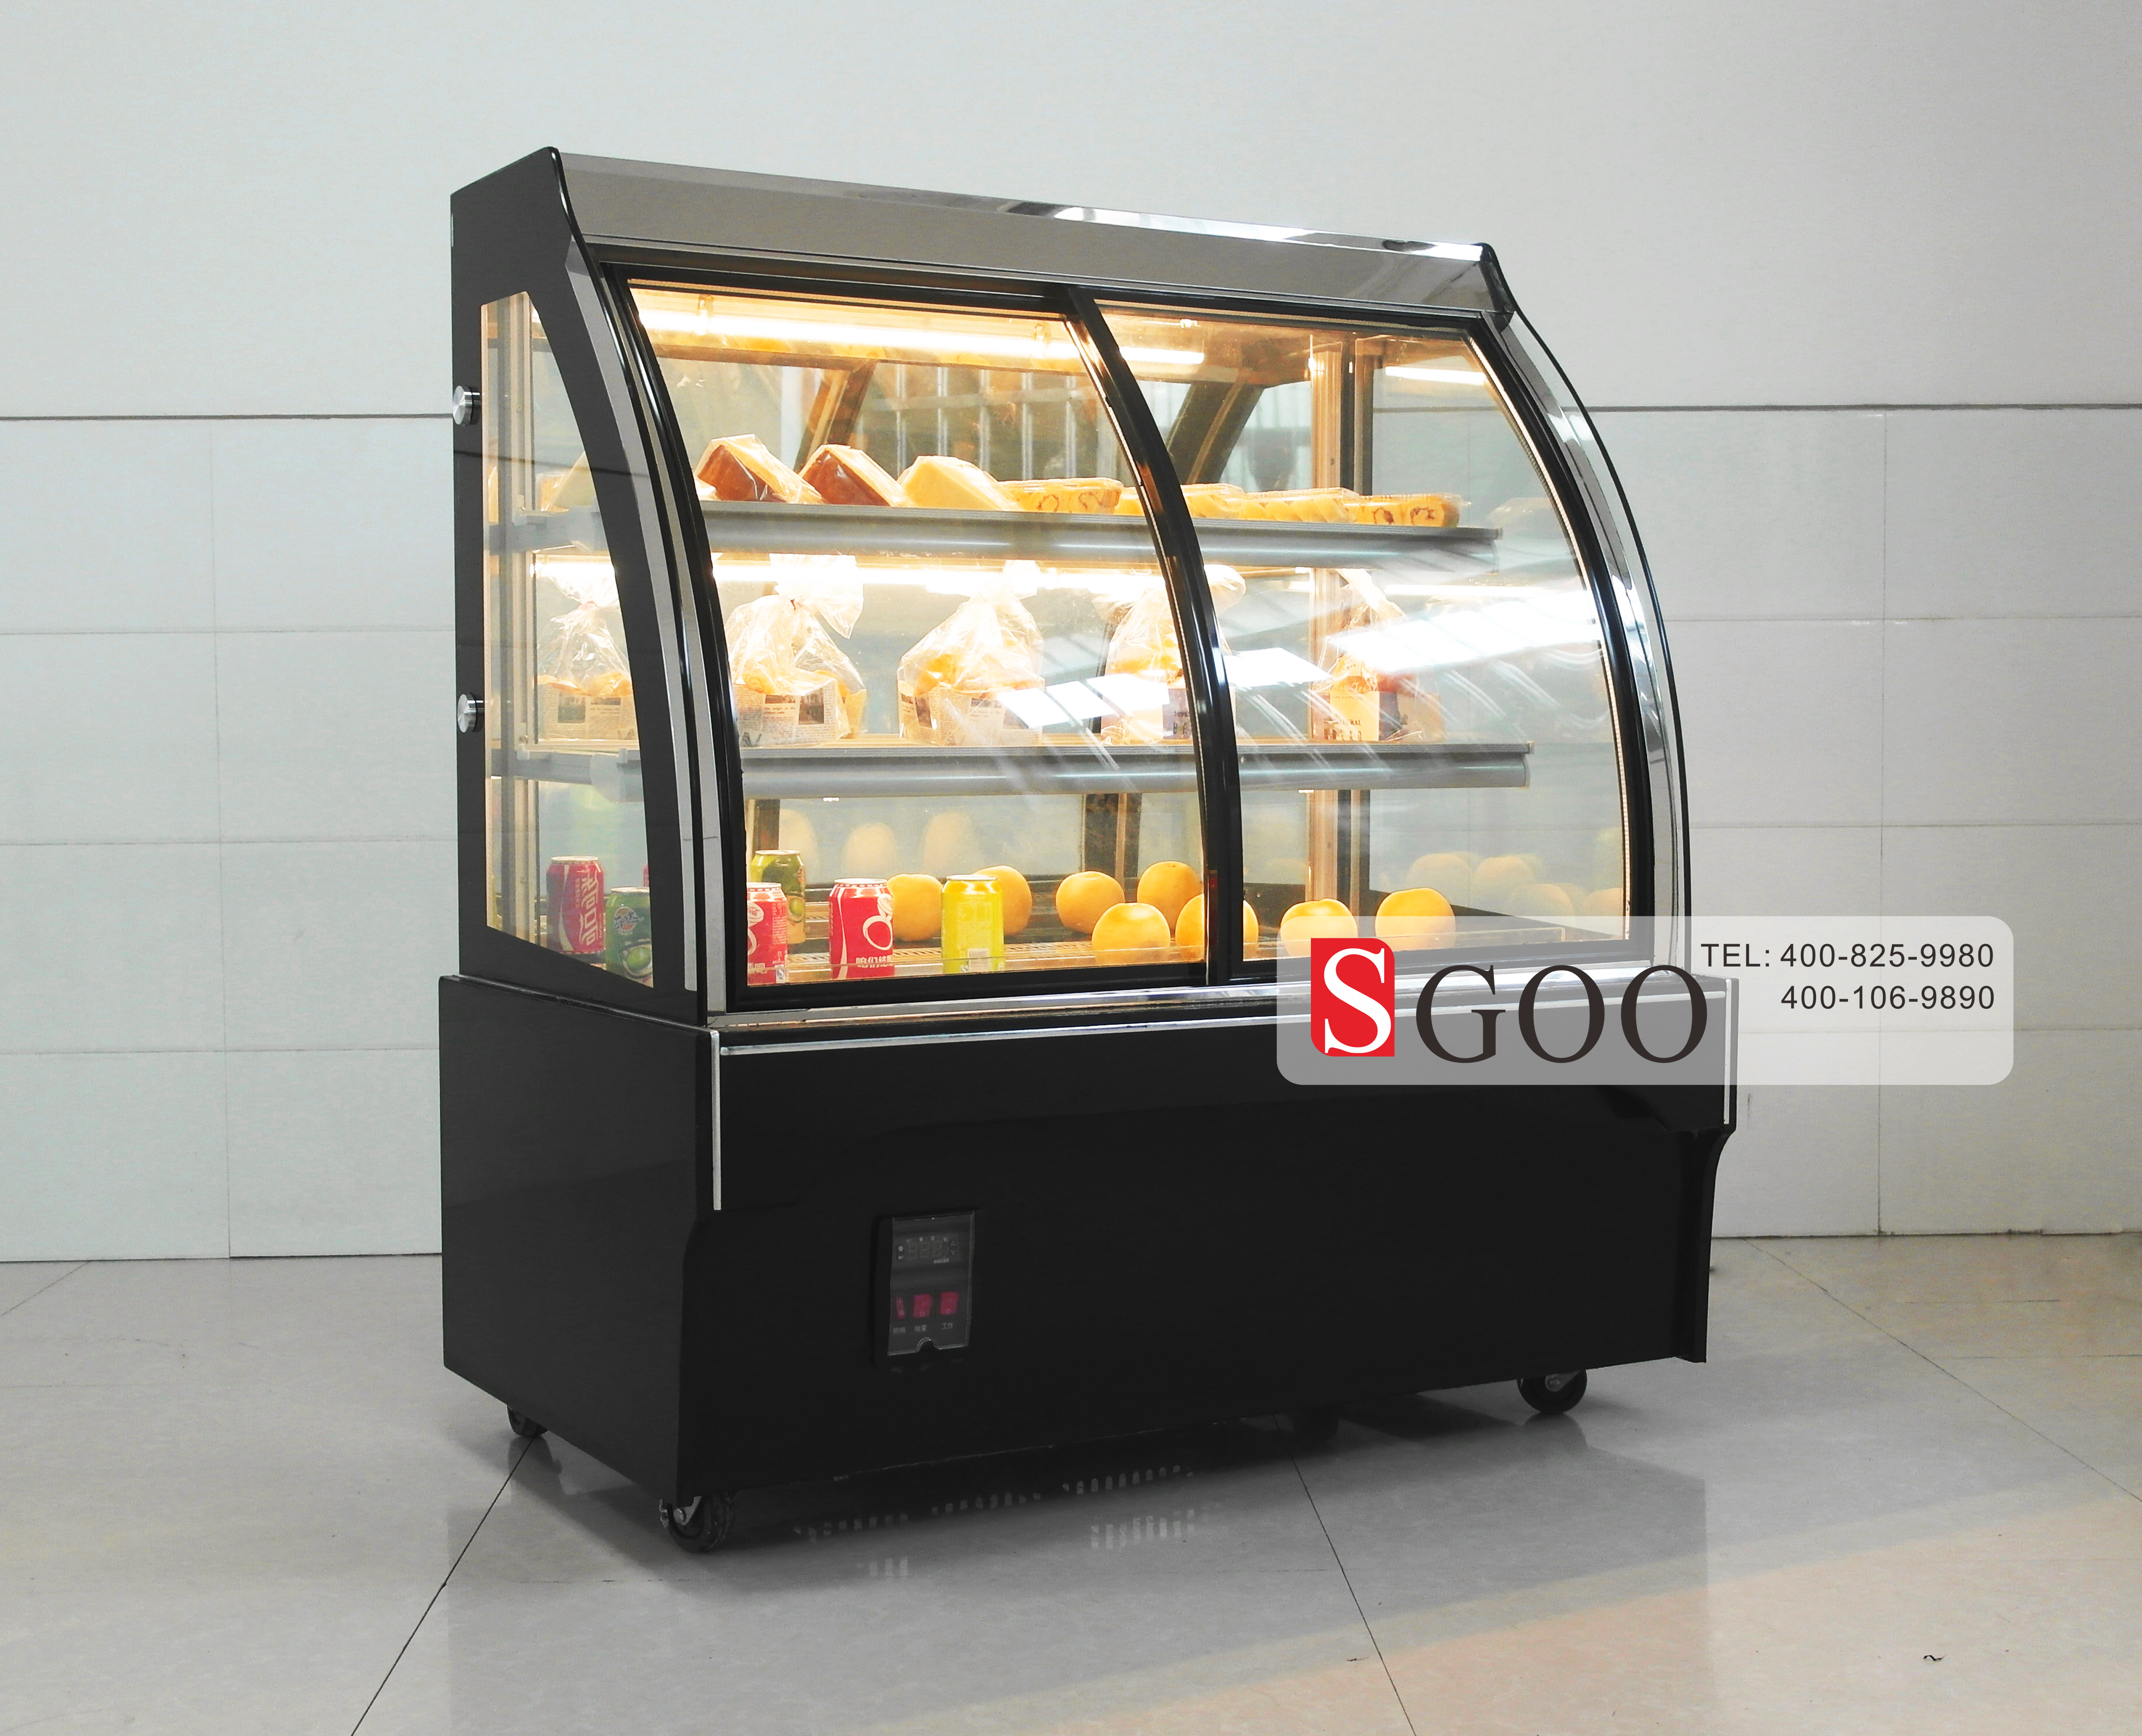 refrigerated showcase: What are the classifications of display cases? Classification of </div>
	<div>
		 